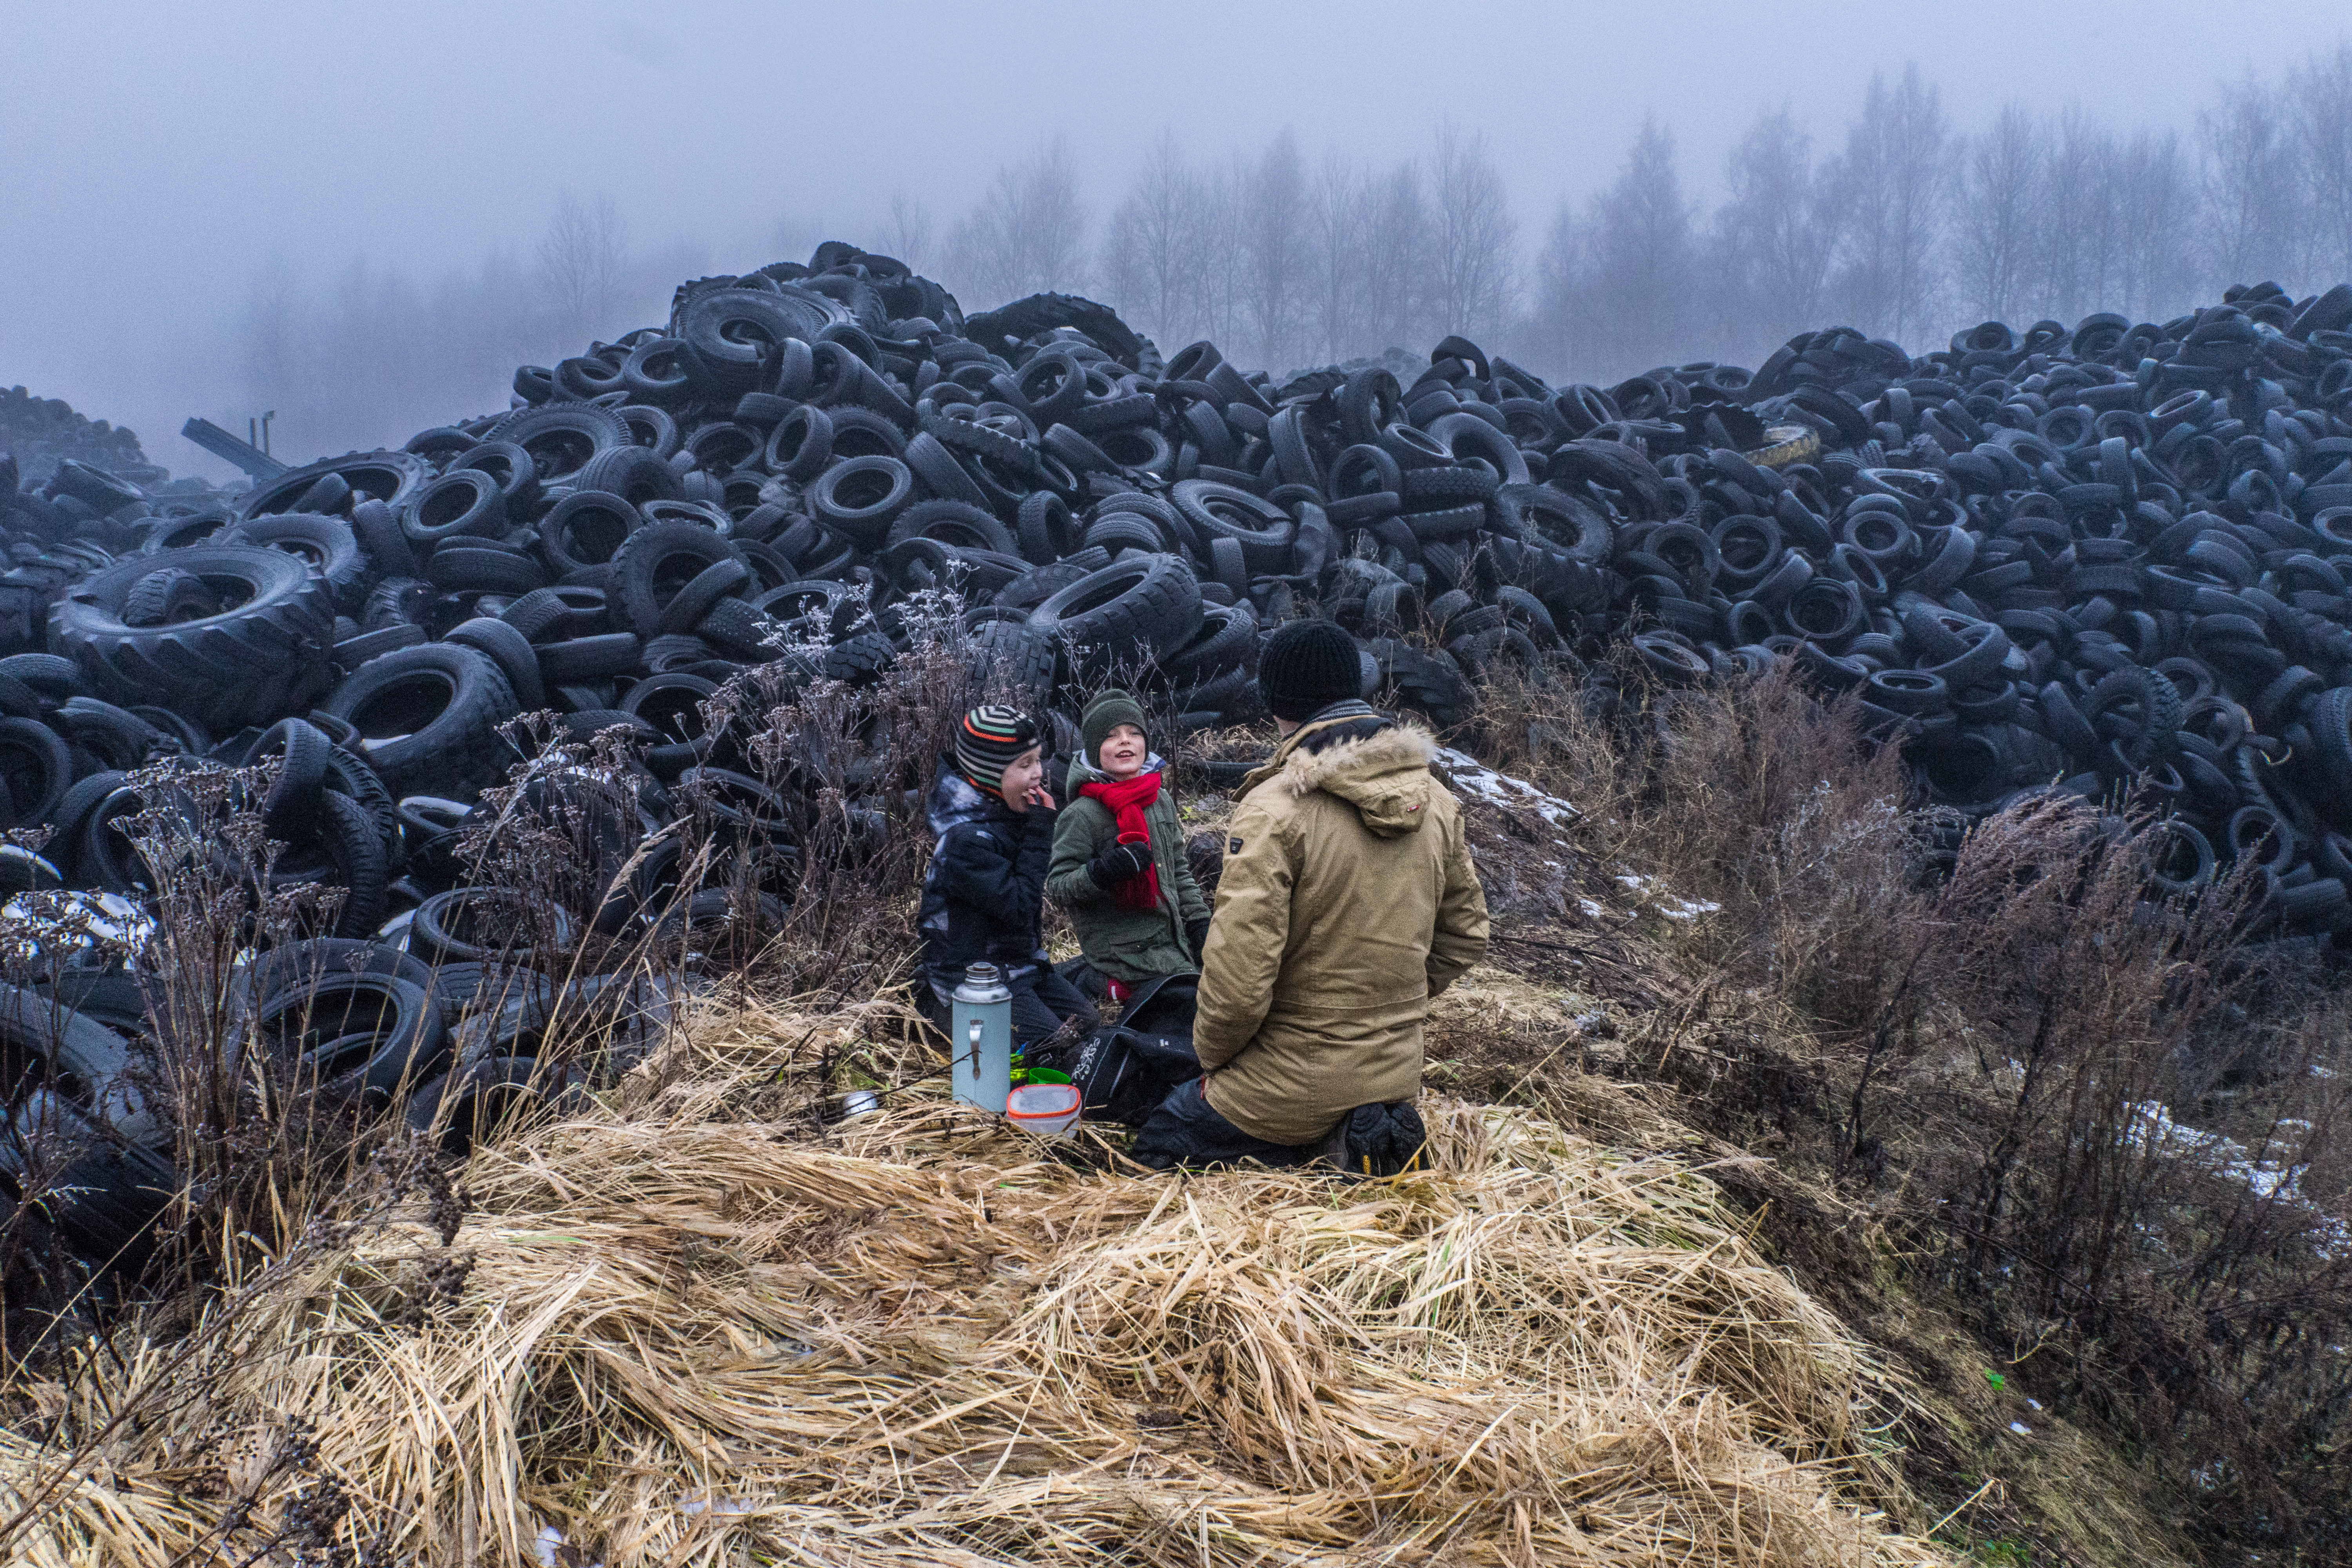 Tyre graveyard, Tartu. Once you’ve learnt to notice how mist generates stories, you start wandering to the strangest places during the fog. The stranger the place, the more amplified the adventure becomes.